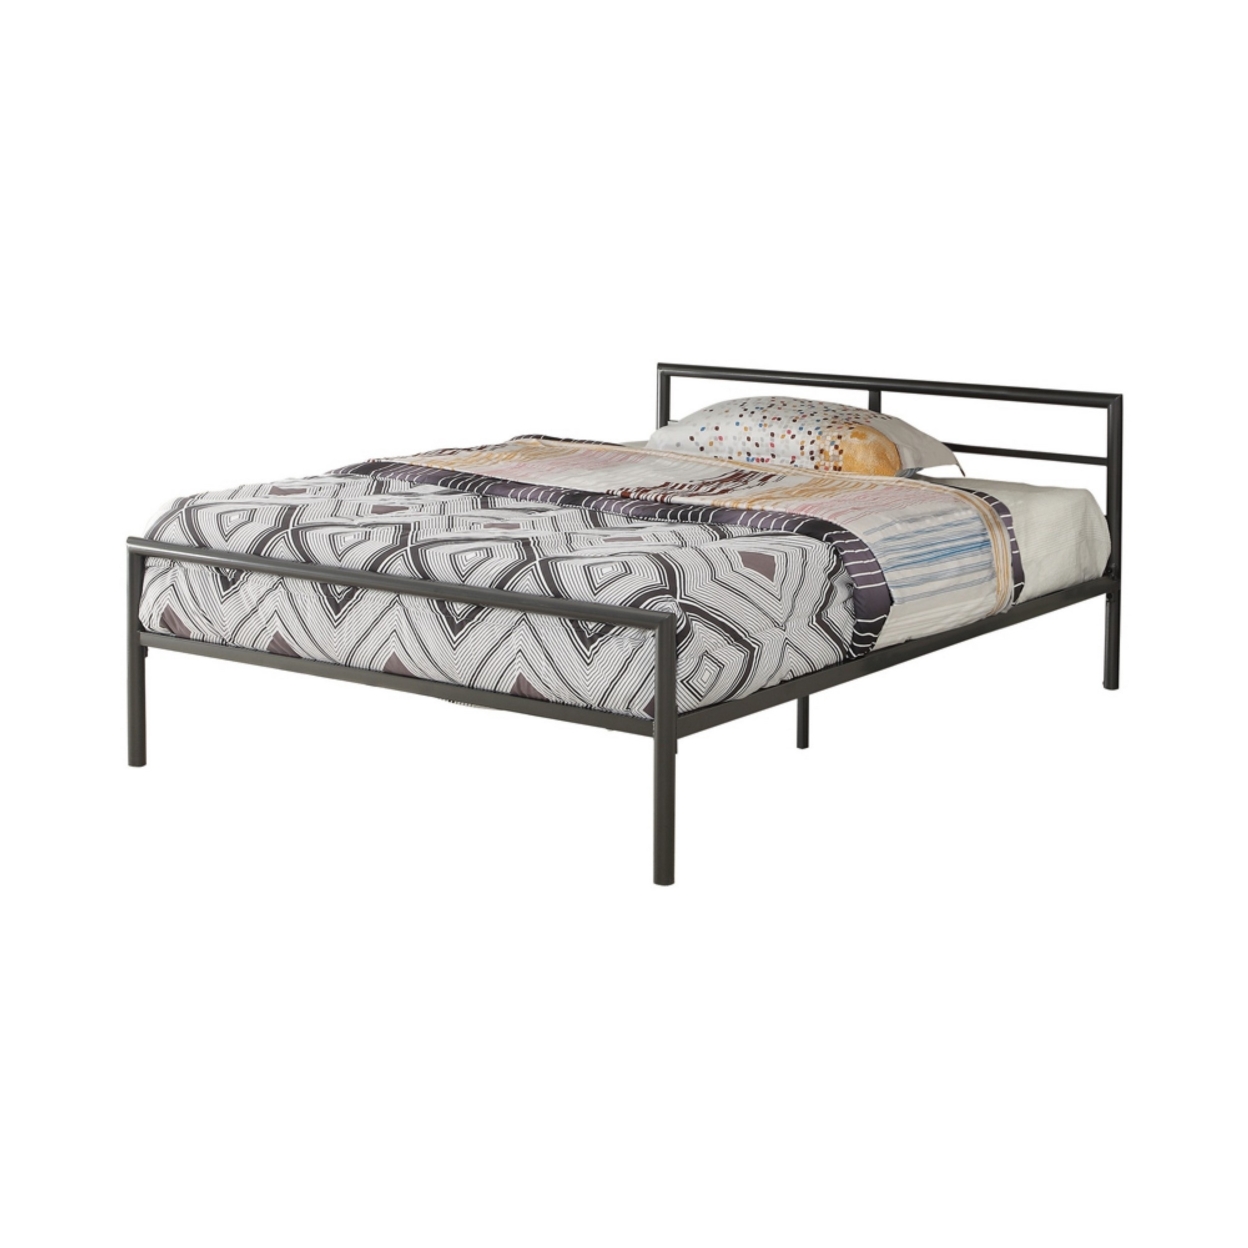 Traditional Styled Full Bed With Sleek Lines, Gray- Saltoro Sherpi